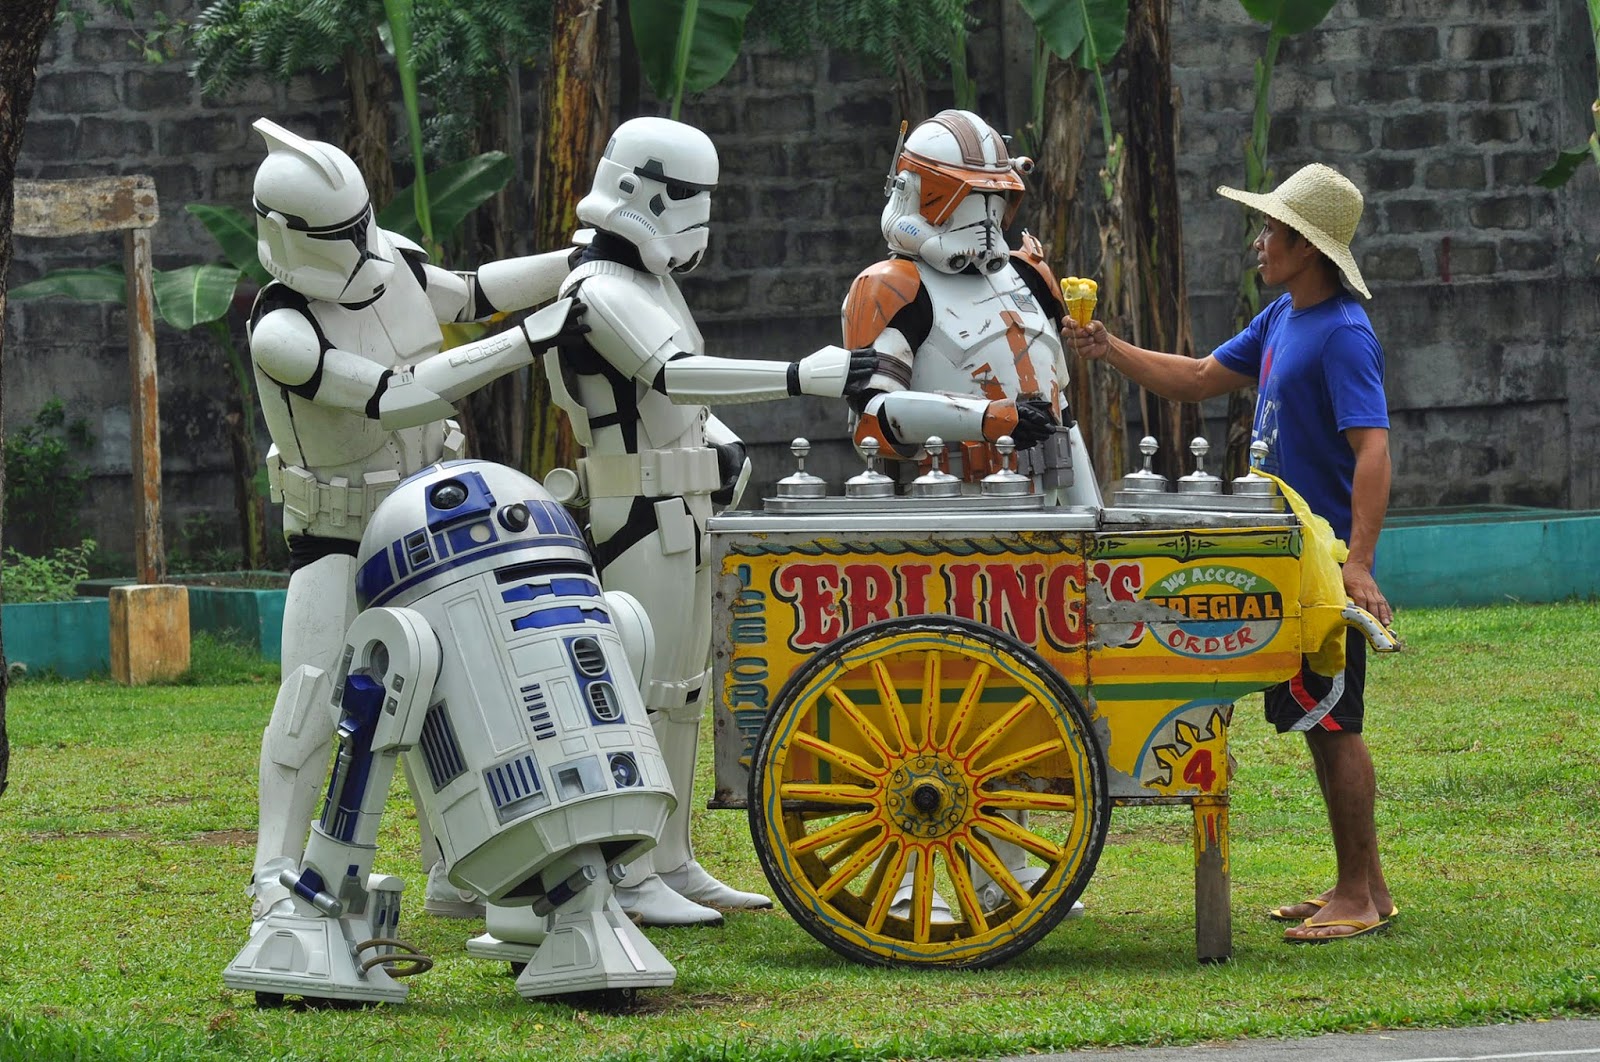 Not even R2D2 and the Stormtroopers are immune from the summer heat. 